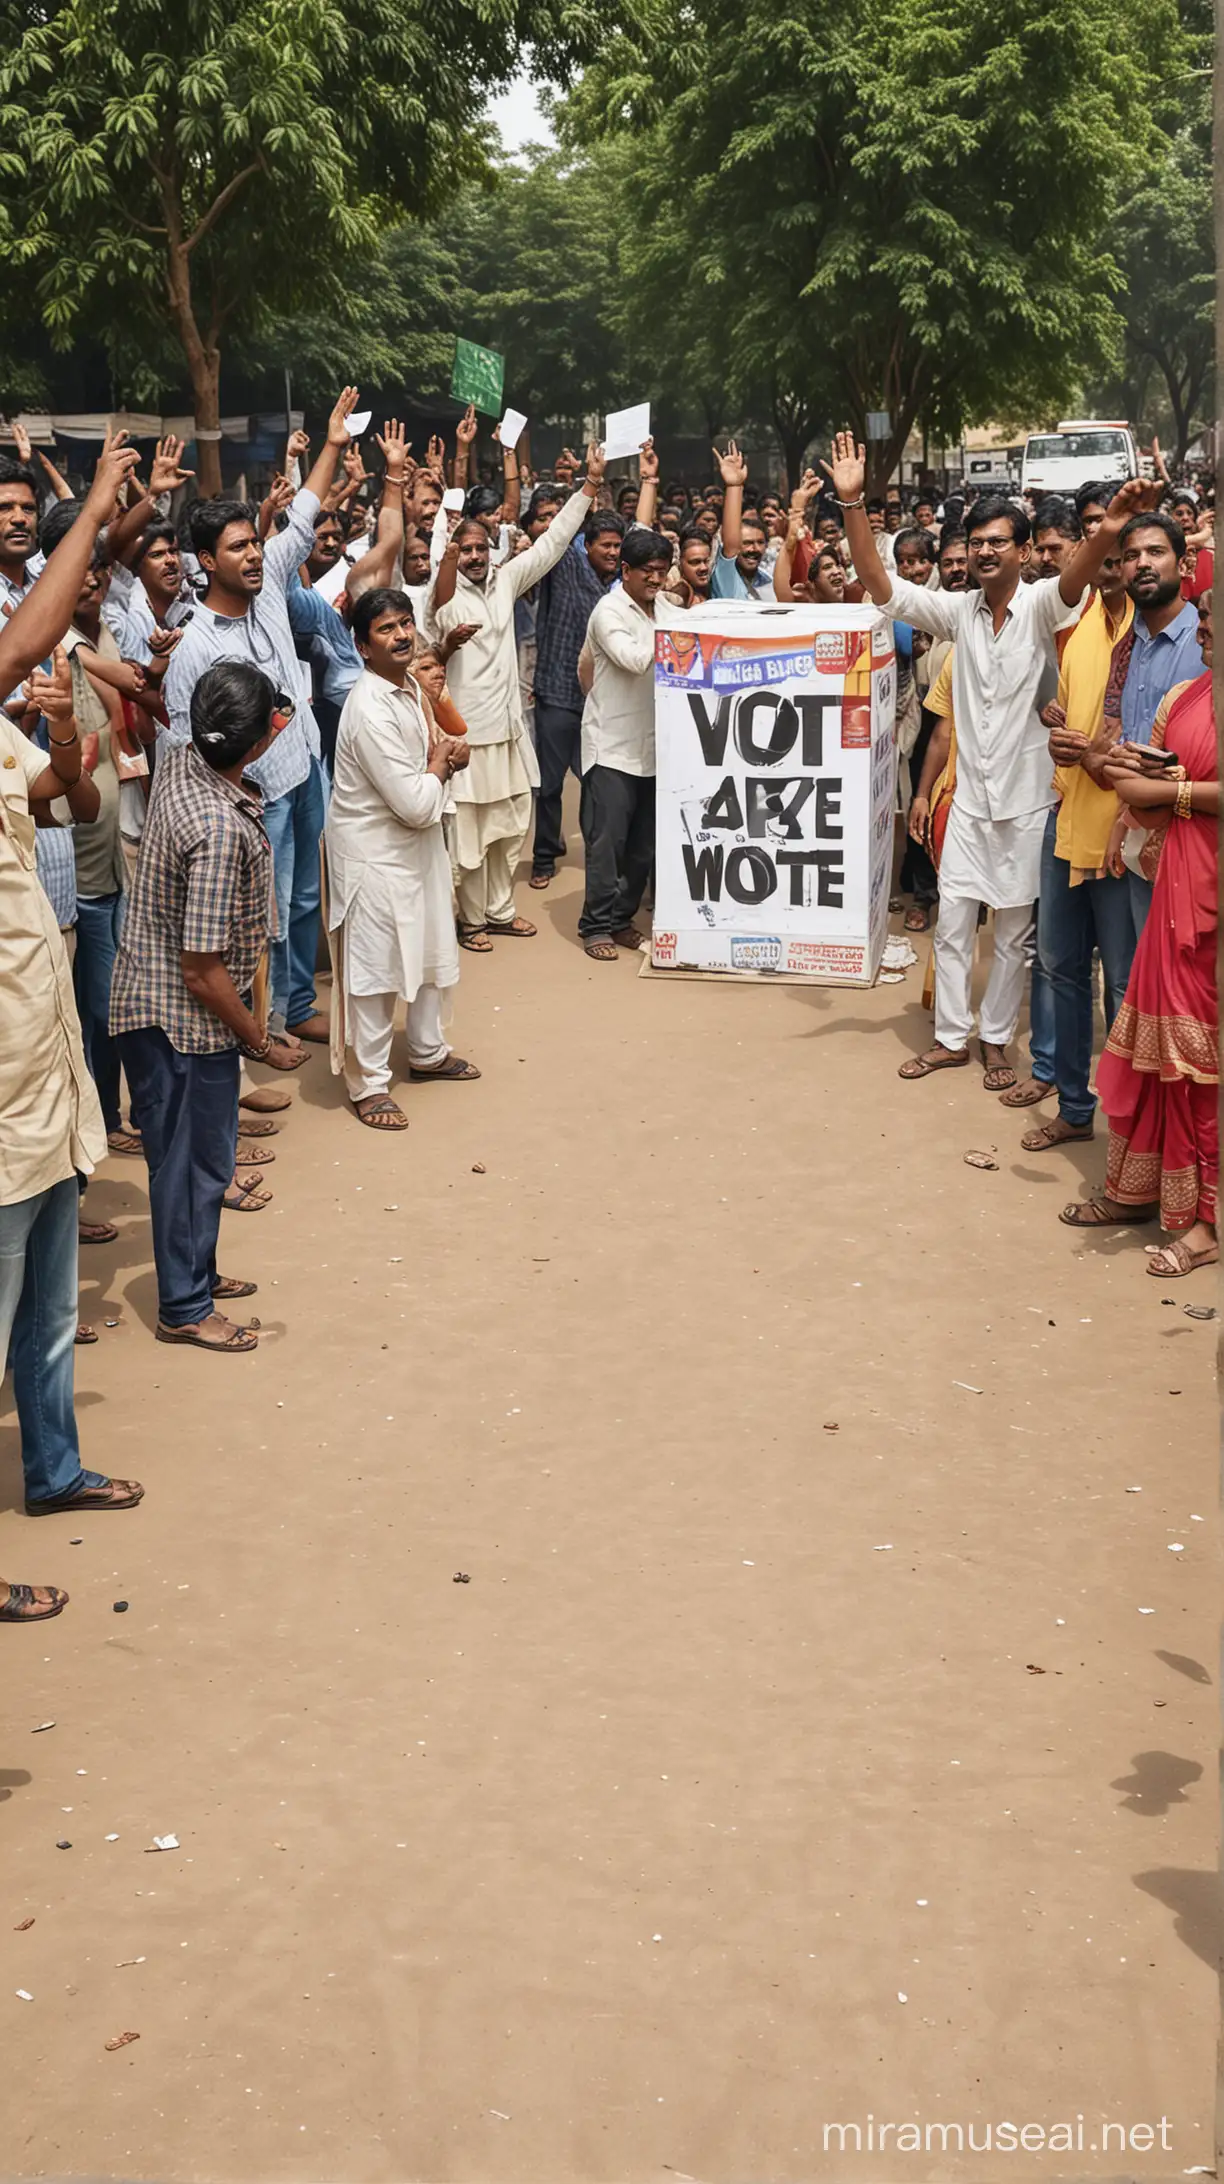 People are going to vote election , all are indians